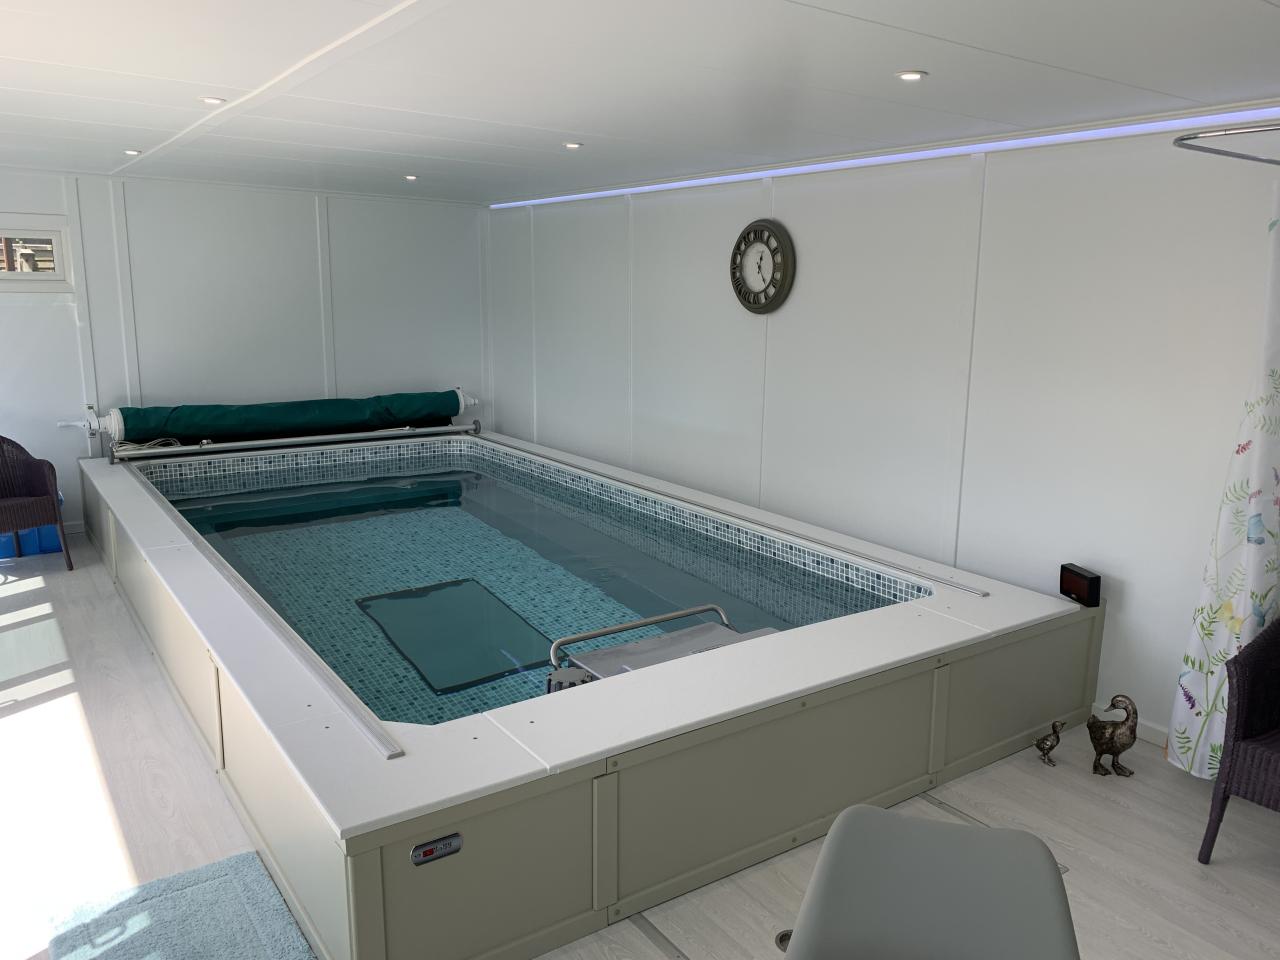 This Endless pool room with side canopy for a Hot-tub offers so much for the user, beautifully finished with some great features throughout. 
In the client's words:
Finding a suitable building to house an Endless Pool had proved very difficult, until we came across Bakers and visited their show buildings at Haywards Heath.
Martin Baker showed us round and explained the pros and cons of all the buildings and options - no hard sell, just a pleasant chat.
We were sold and haven't been disappointed with the resulting build and building.
Lovely people, great product. Highly Recommended